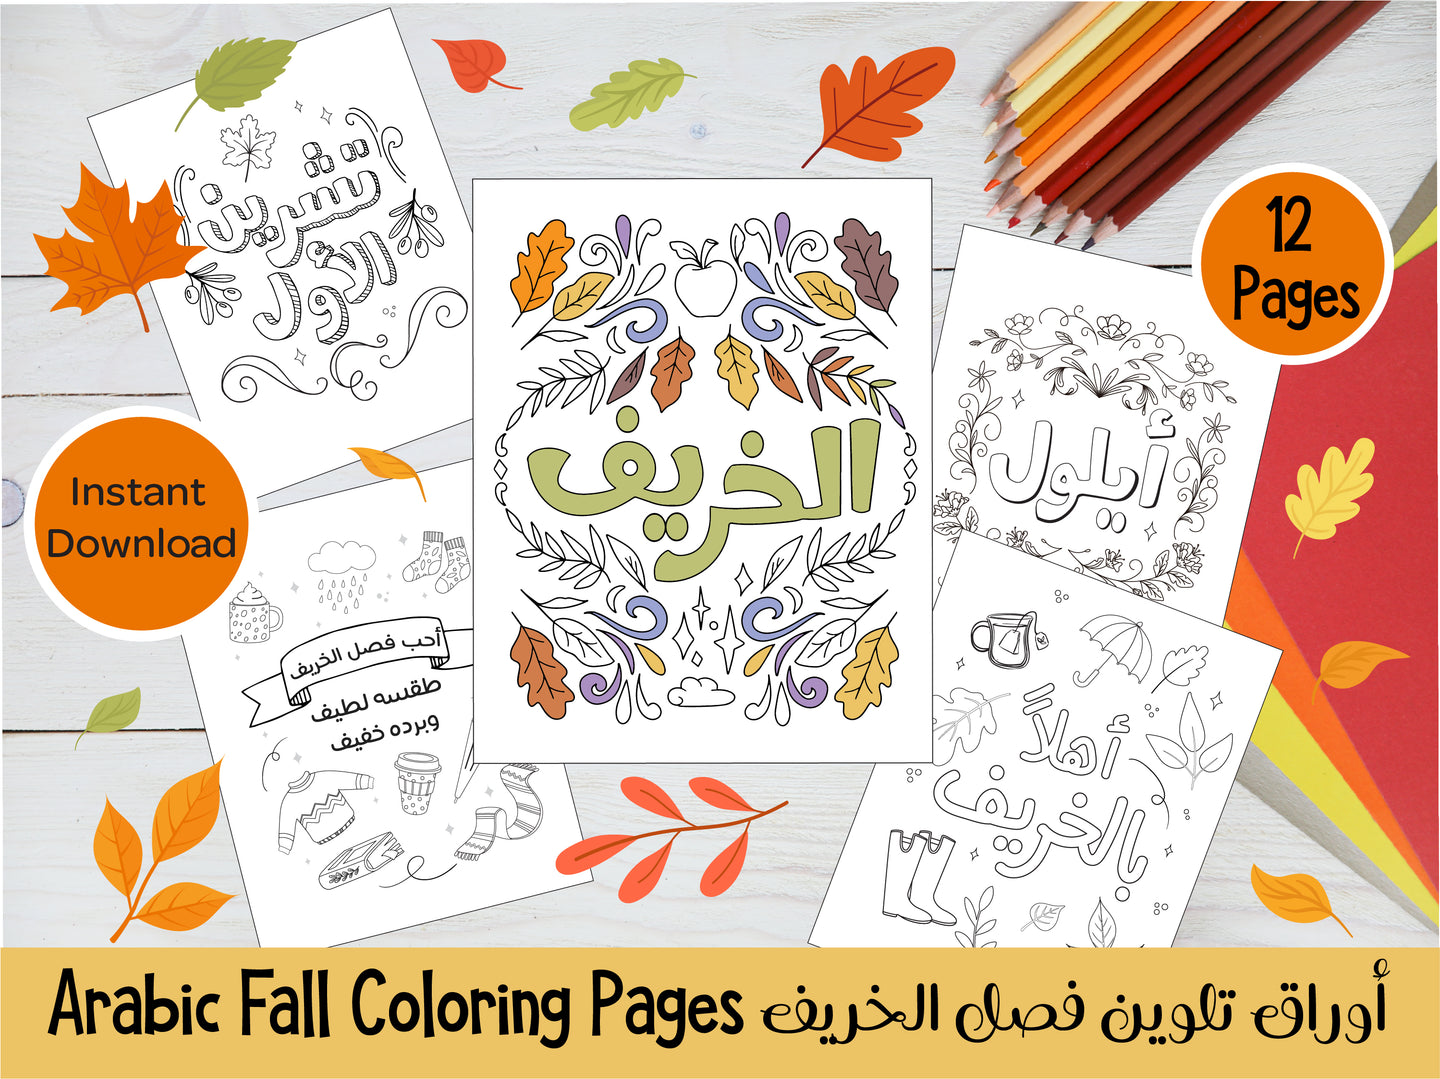 Arabic Fall coloring pages, autumn Arabic coloring pages, Fall Arabic coloring pages, arabic coloring pages, arabic